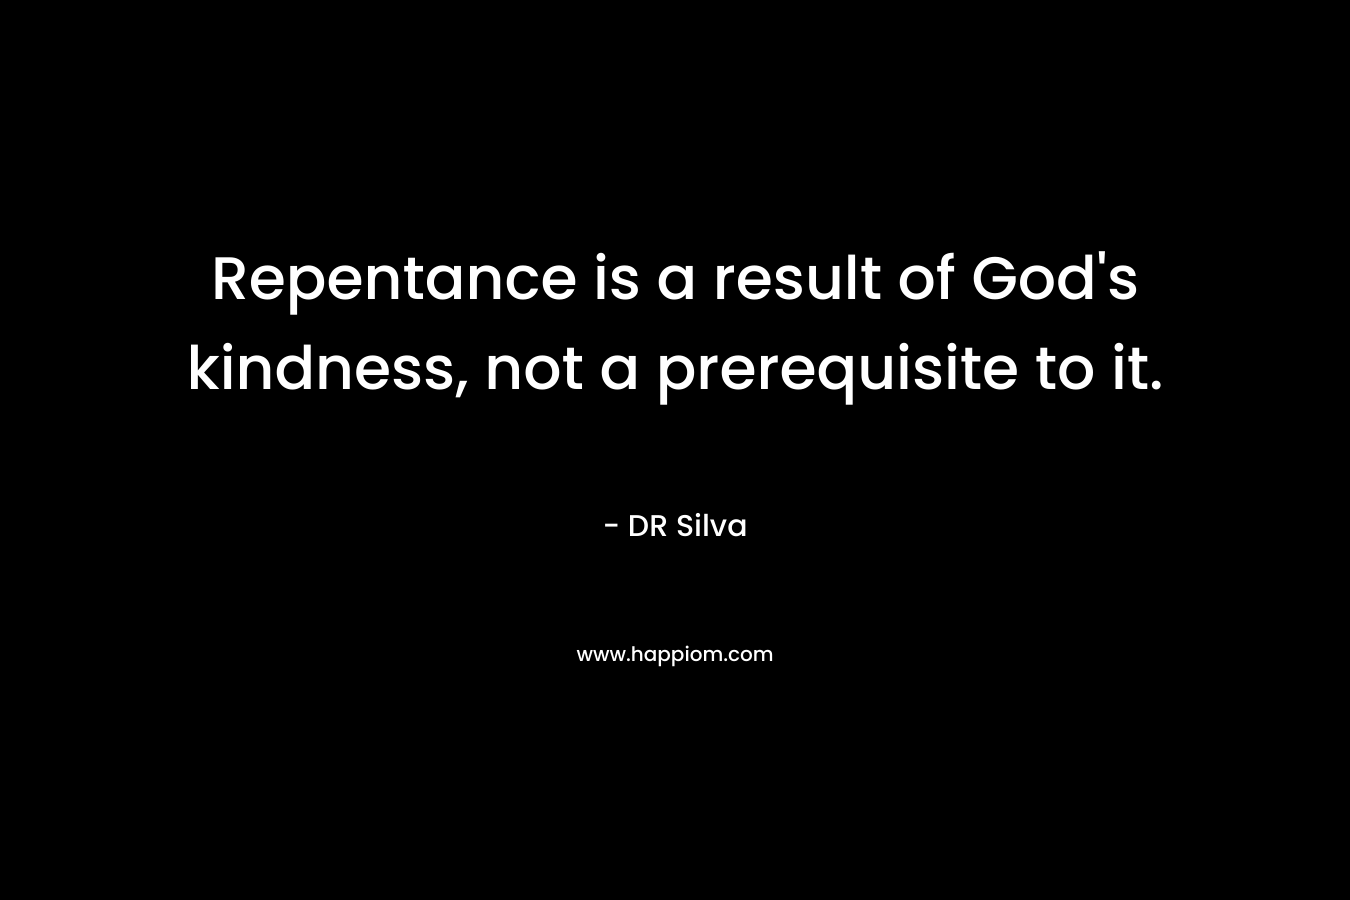 Repentance is a result of God’s kindness, not a prerequisite to it. – DR Silva